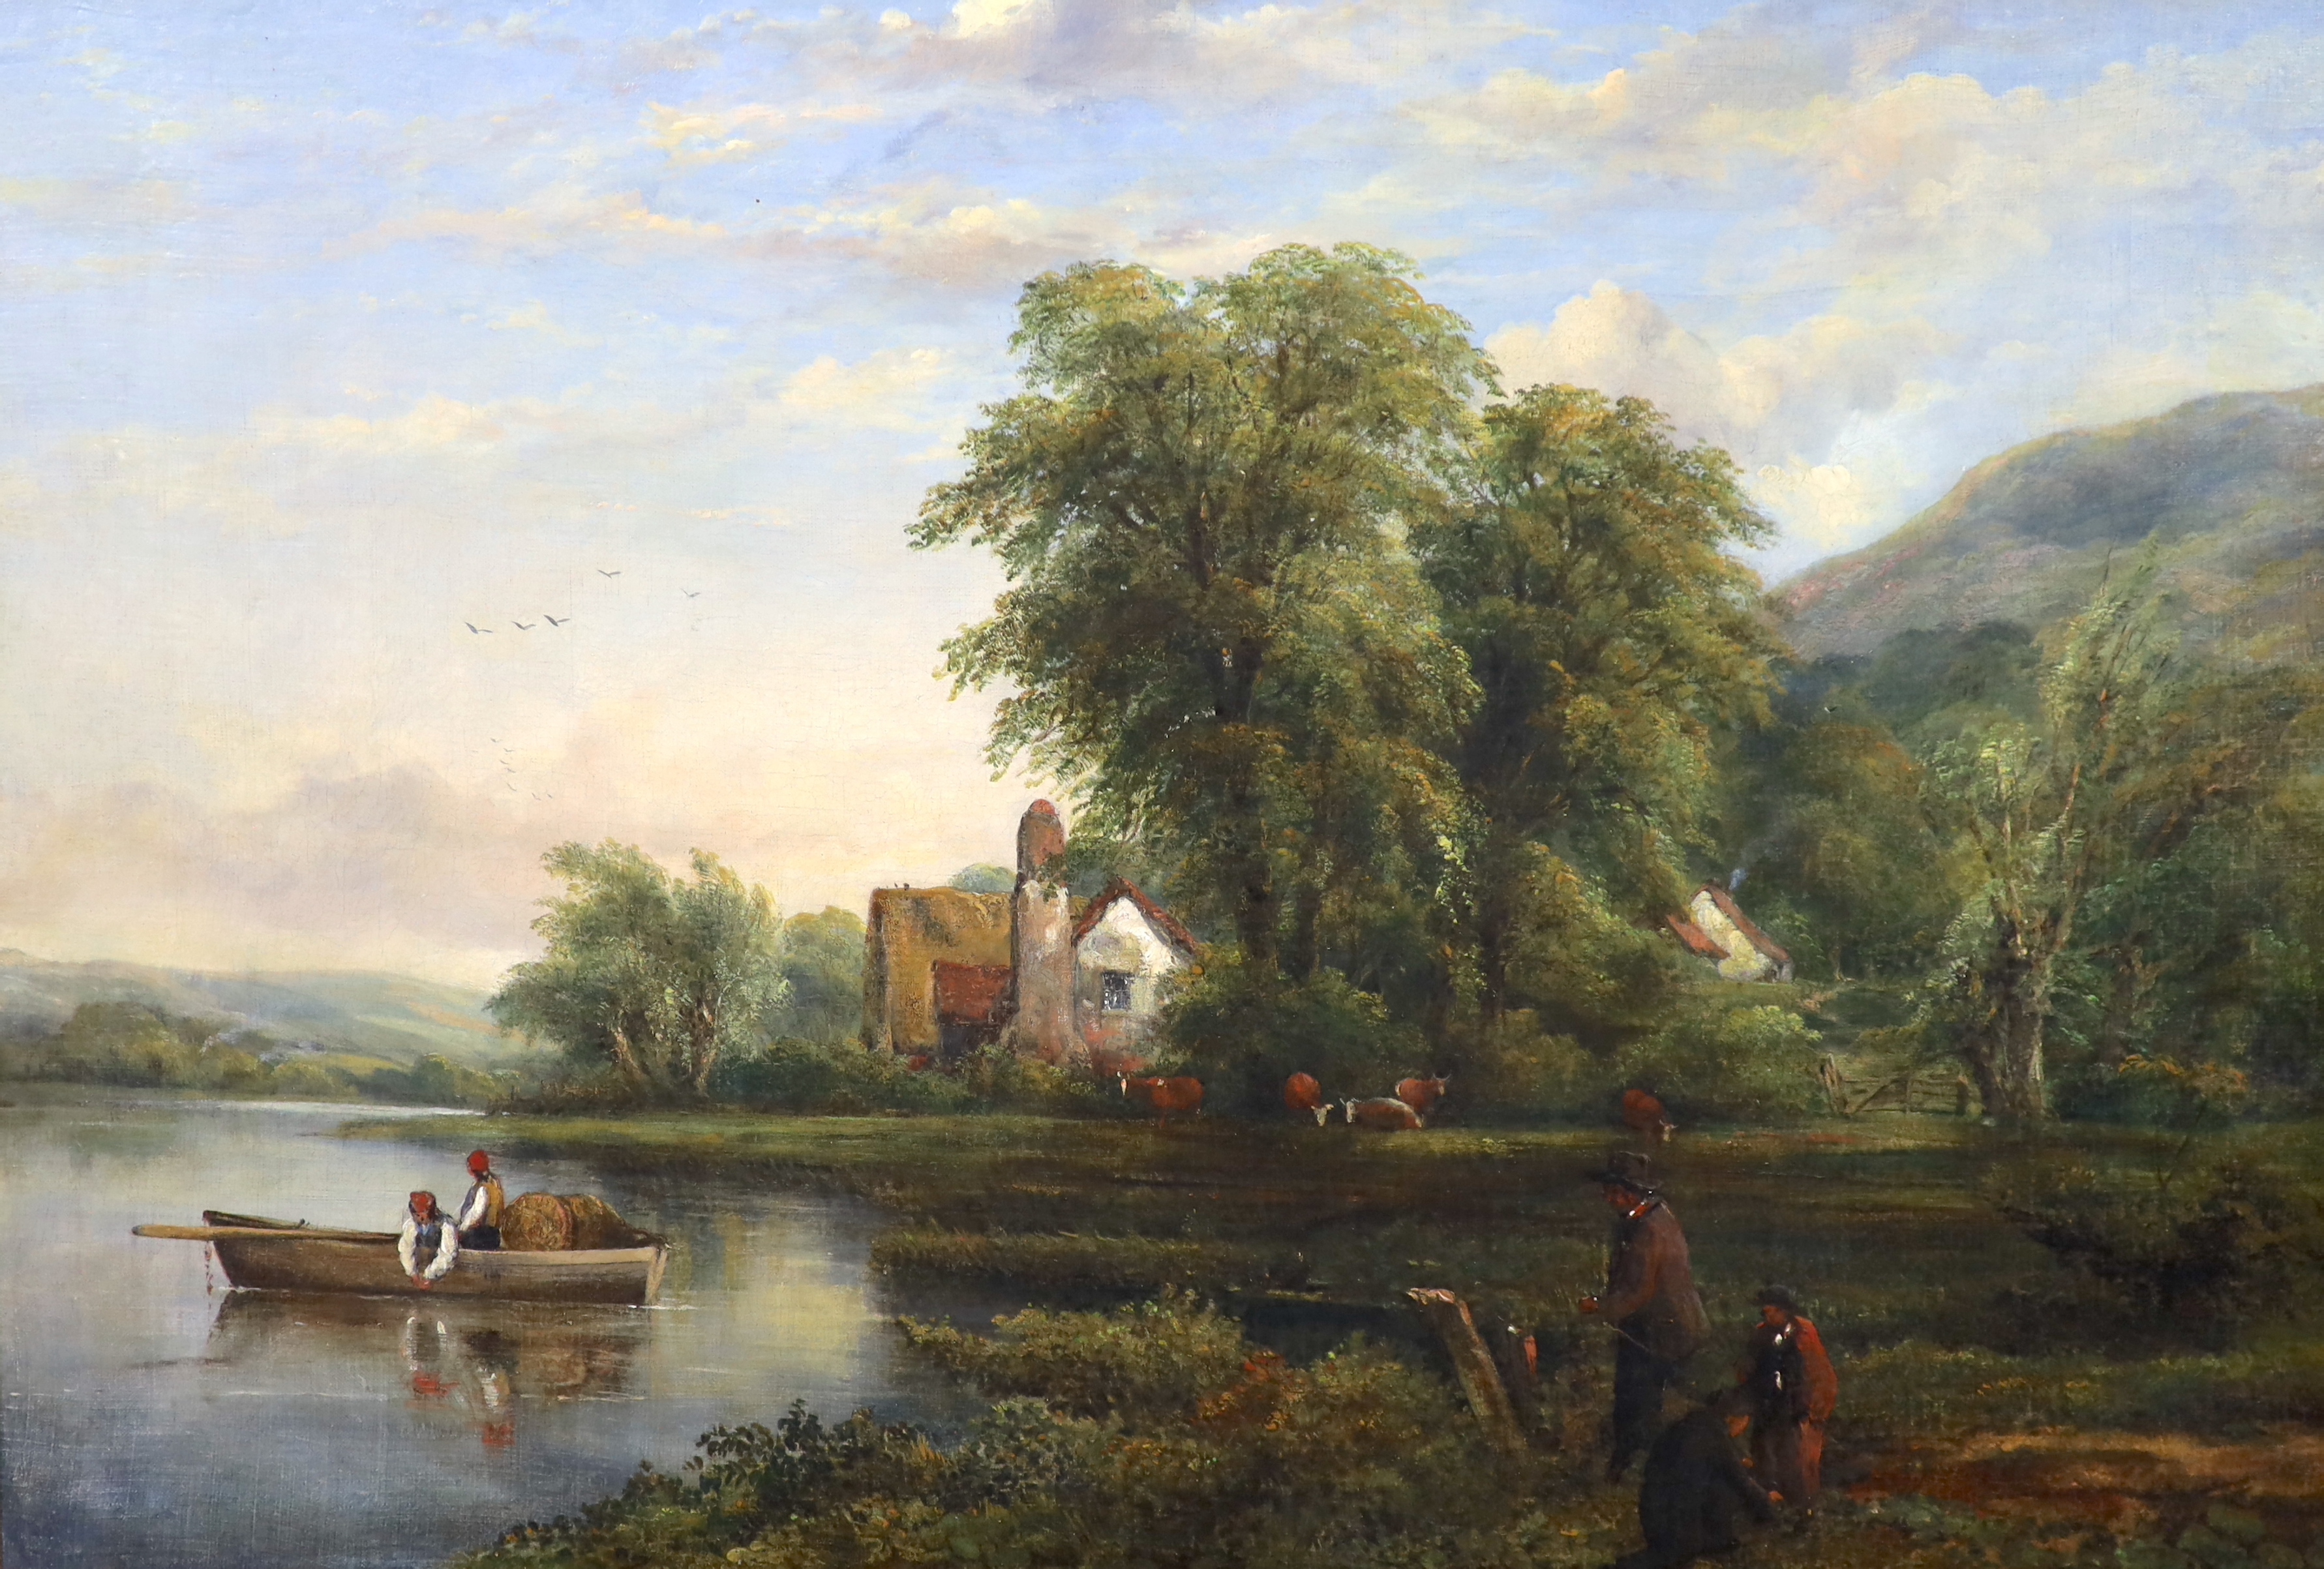 Frederick William Watts (English, 1800-1870), oil on canvas, River landscape with fishermen in a boat, onlookers on the bank and cattle beyond, 50 x 73cm